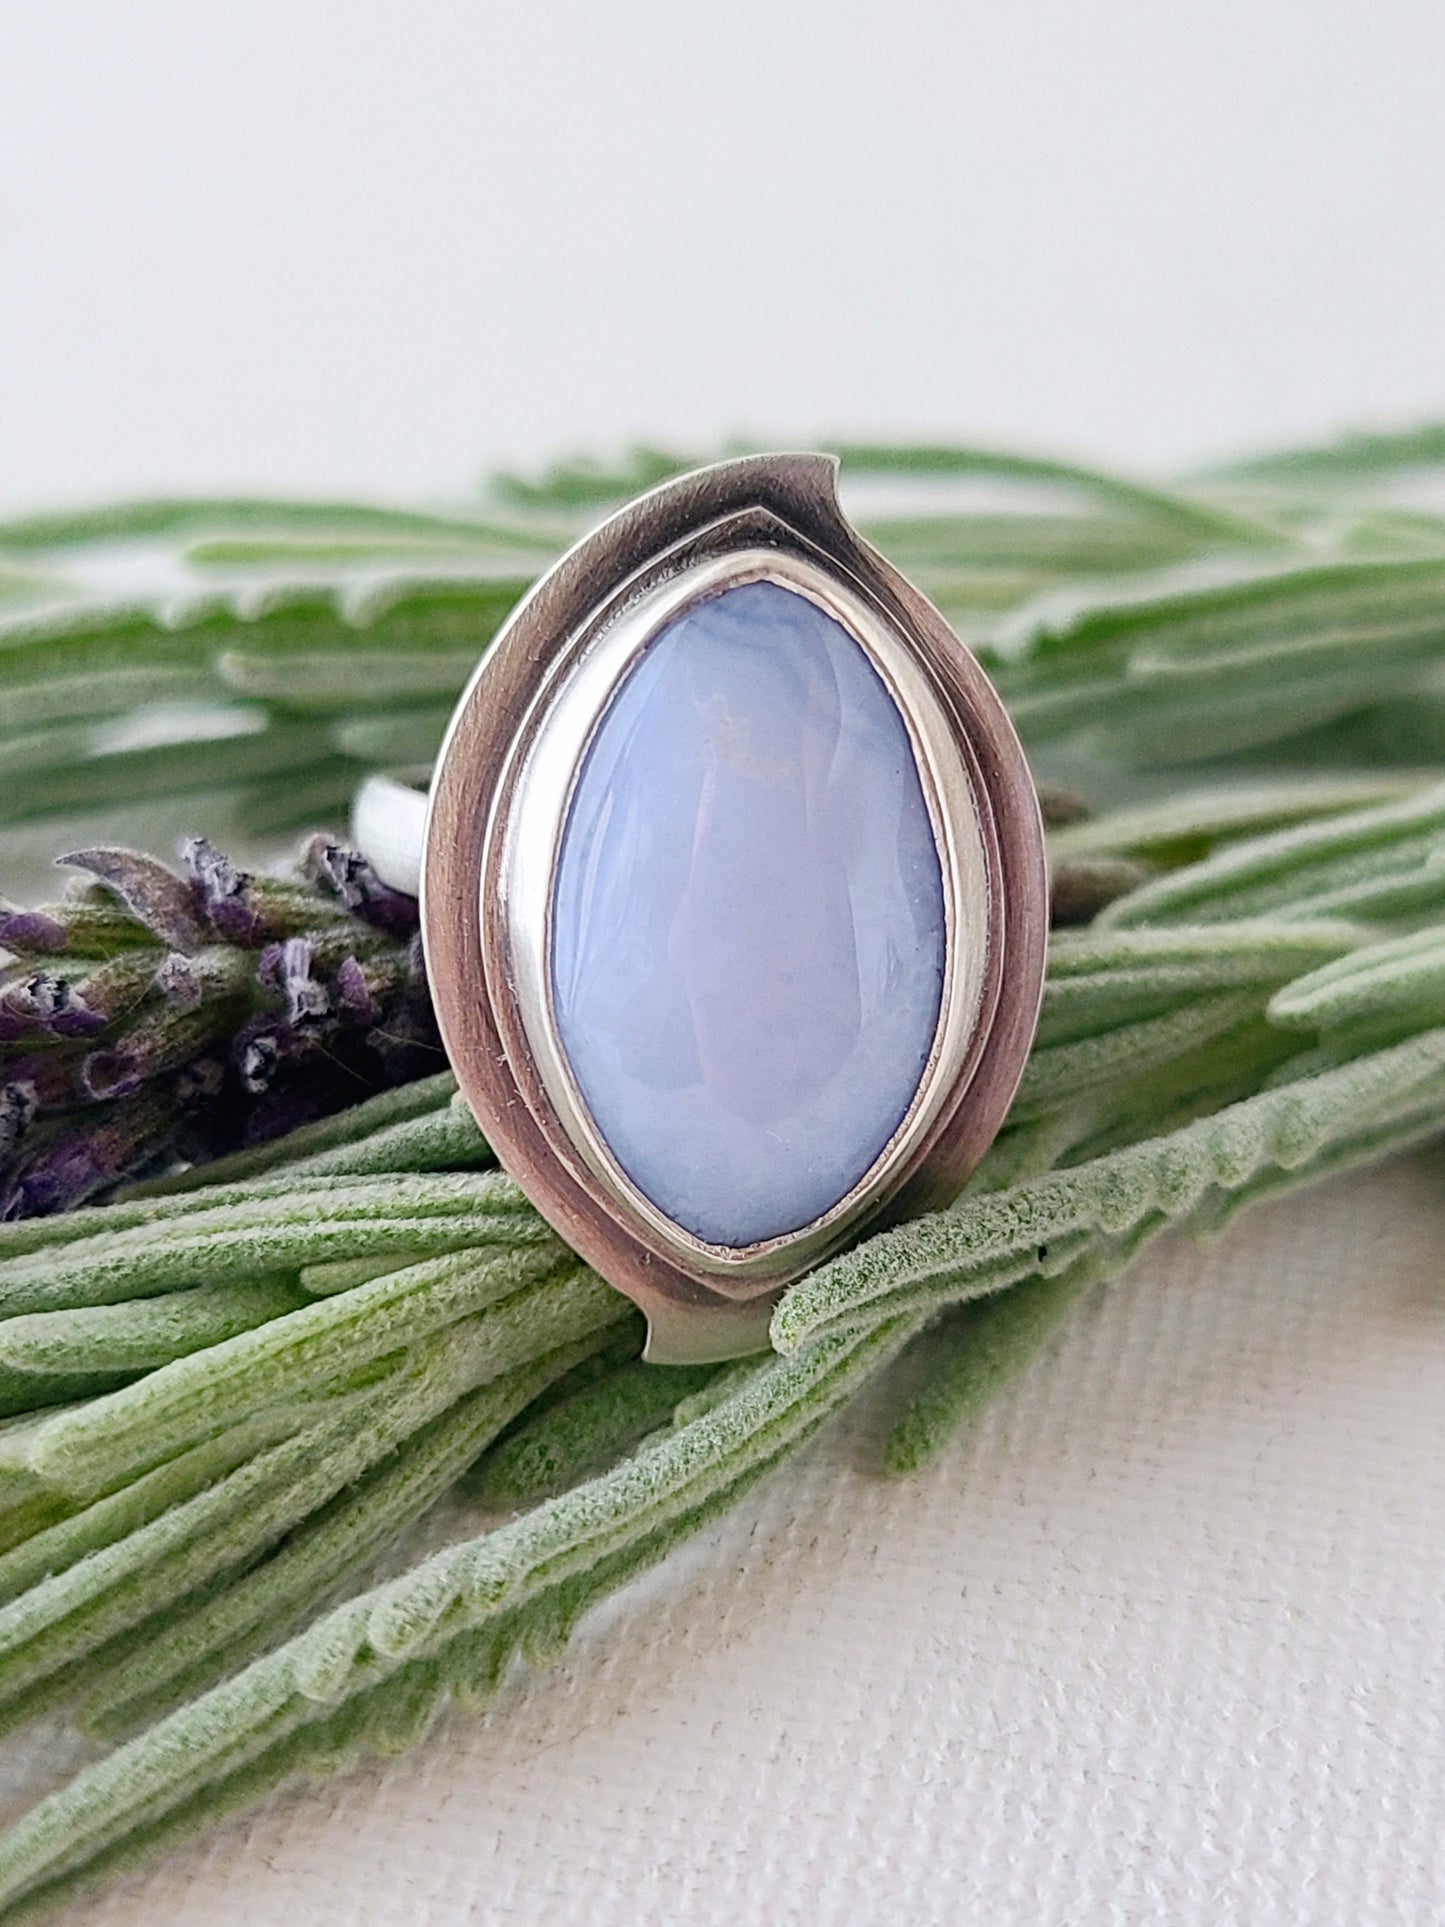 Blue Mist: Marquise Agate Ring-size 8.25 US